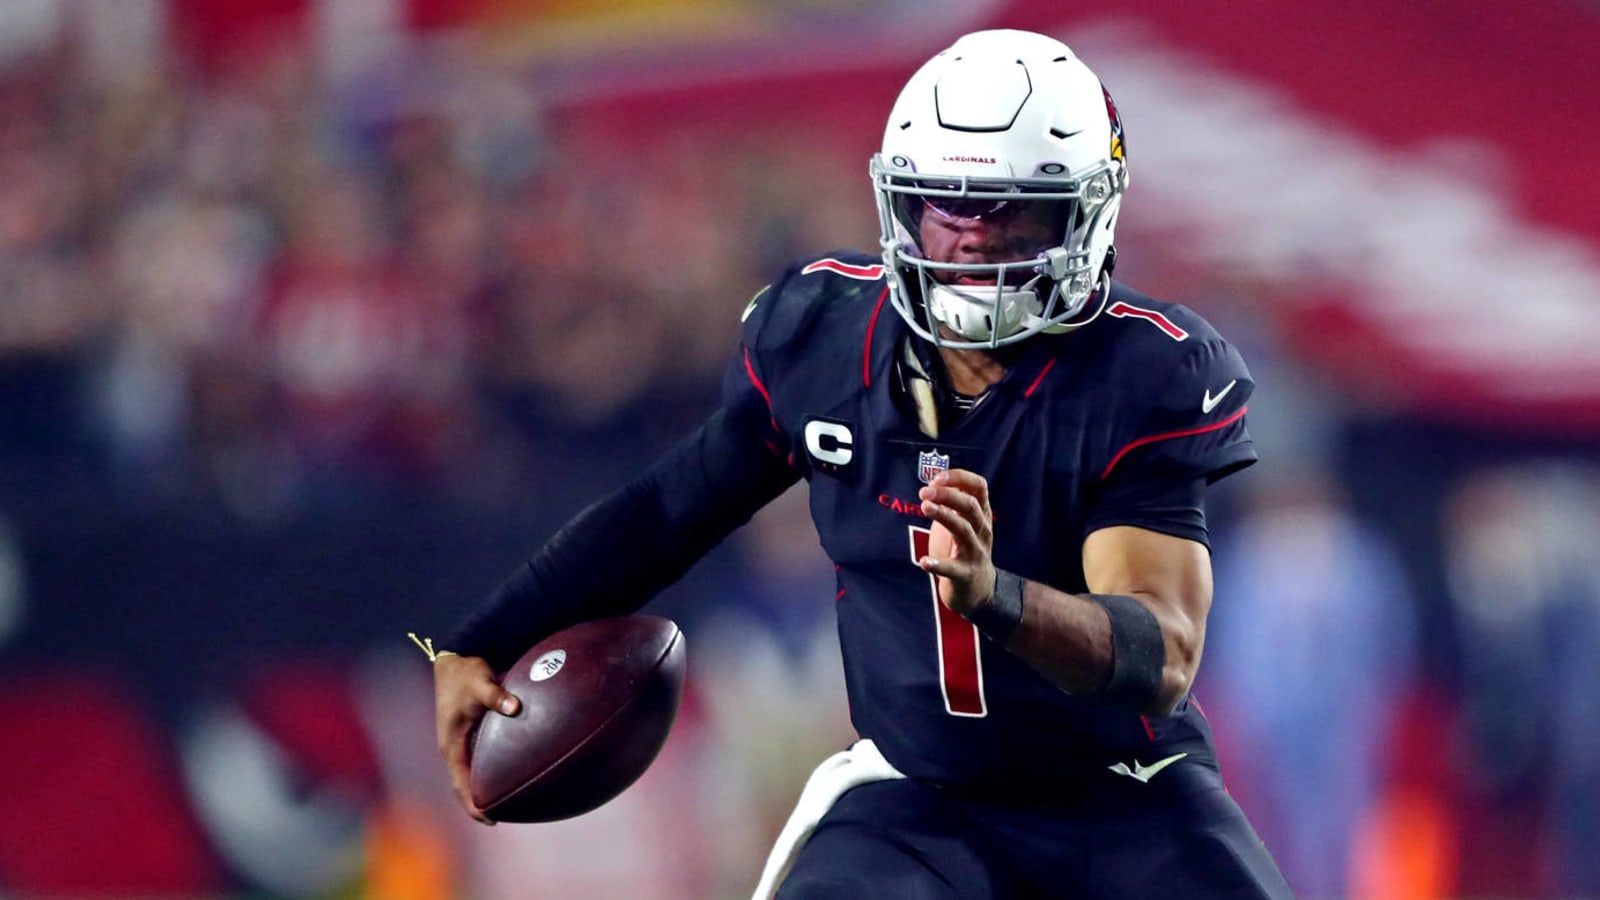 Kyler Murray will start only if he can play at 'high level' from pocket